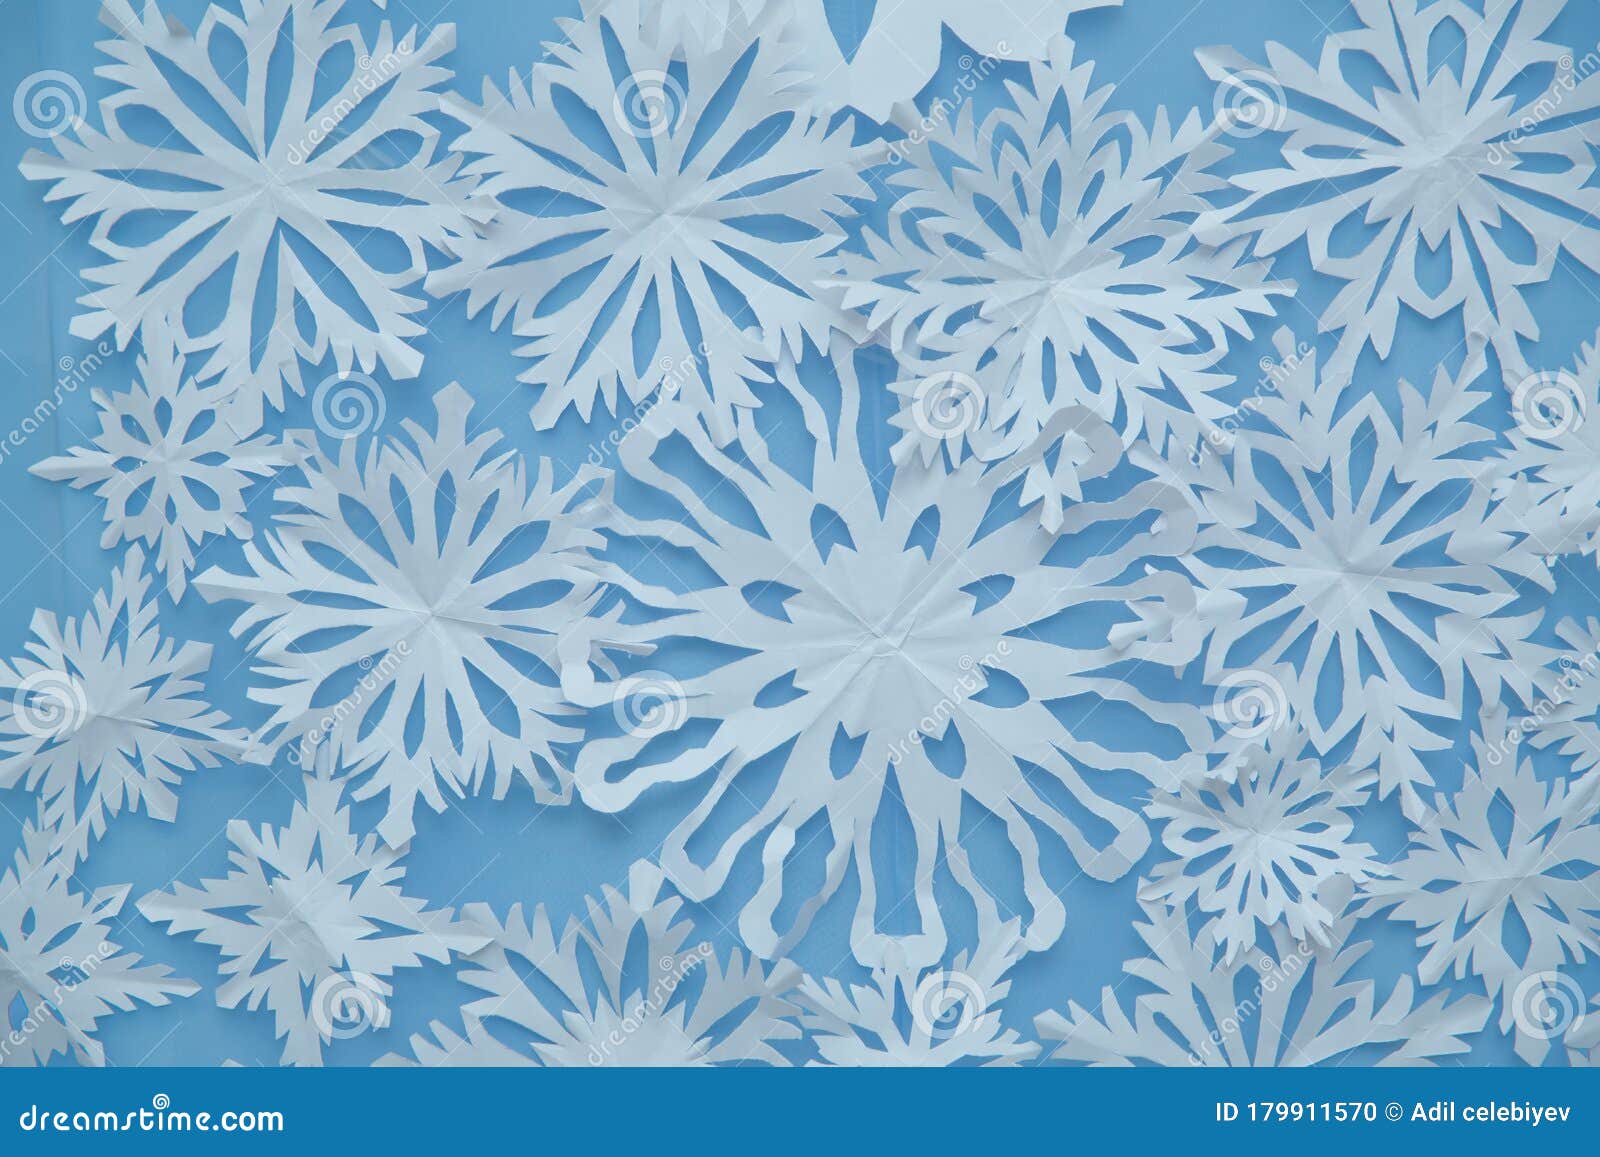 Snow Background. Snowflakes Seamless Pattern. Winter Snowy Seamless Border  Wallpaper. Royalty Free SVG, Cliparts, Vectors, and Stock Illustration.  Image 35275257.